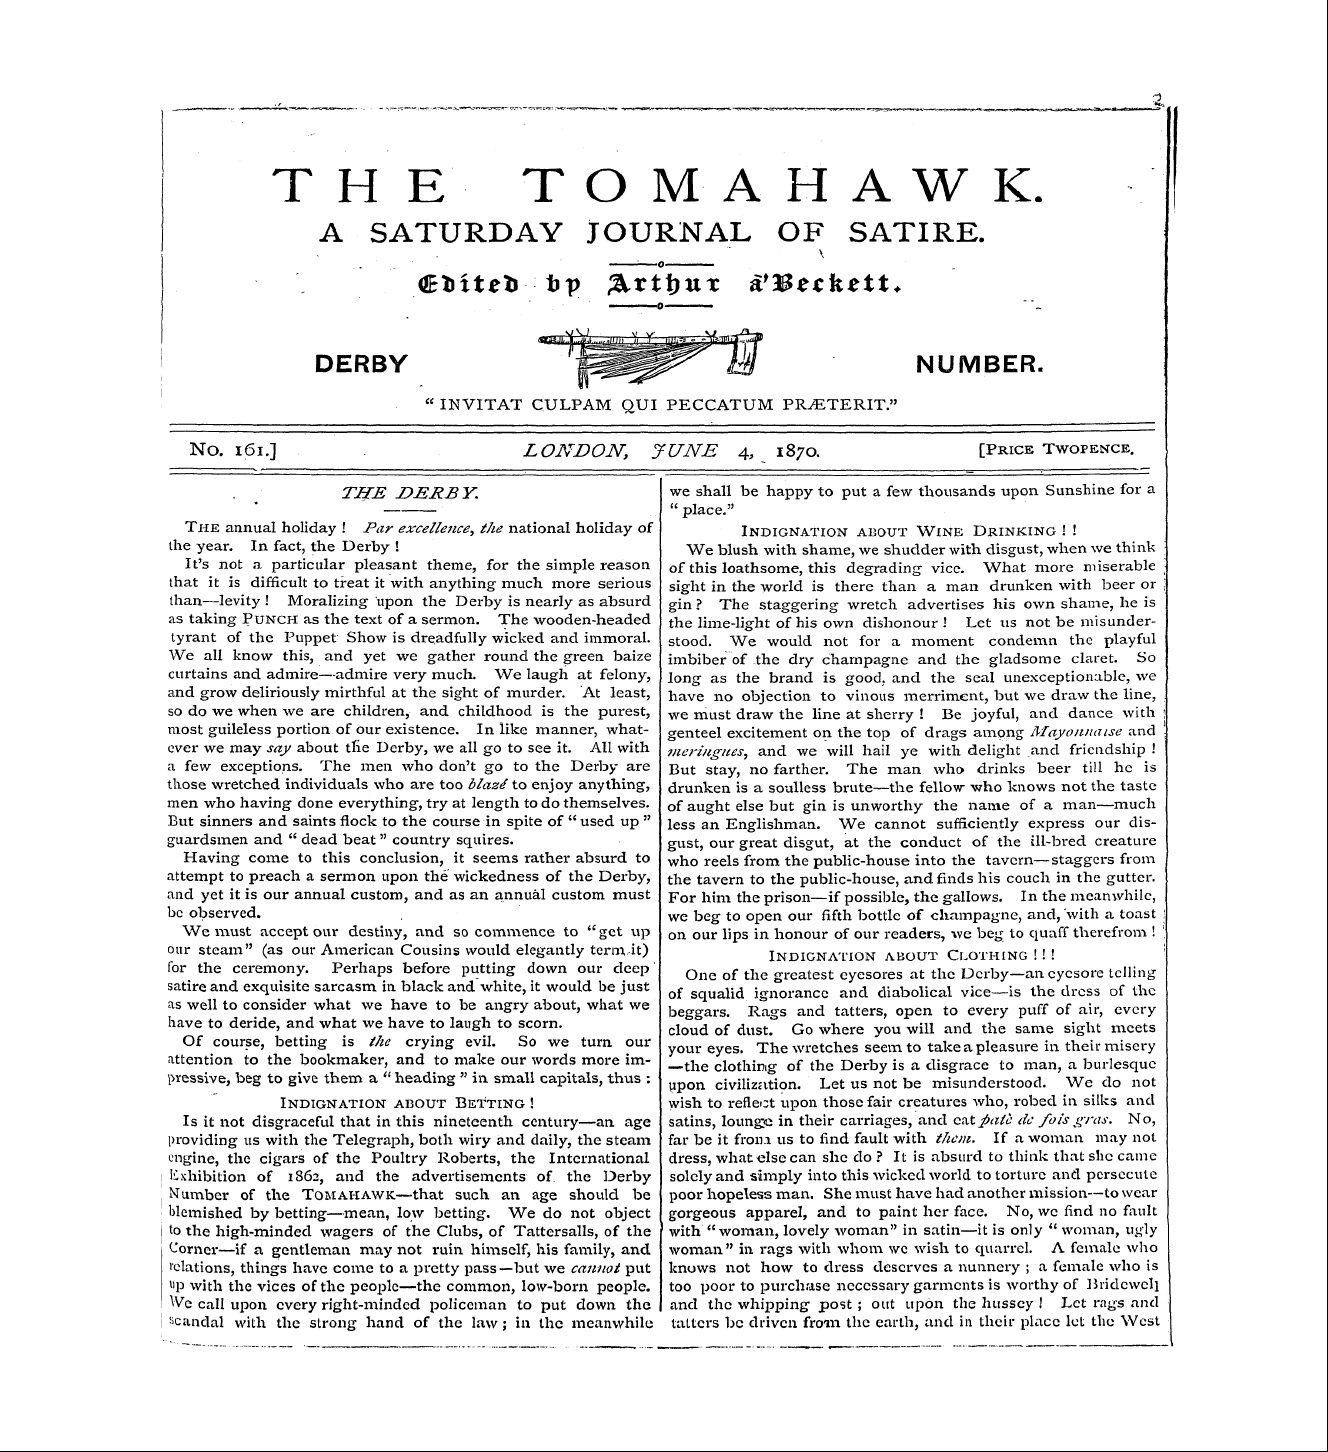 Tomahawk (1867-1870): jS F Y, 1st edition - 2l The Tomahawk. A Saturday Journal Of S...